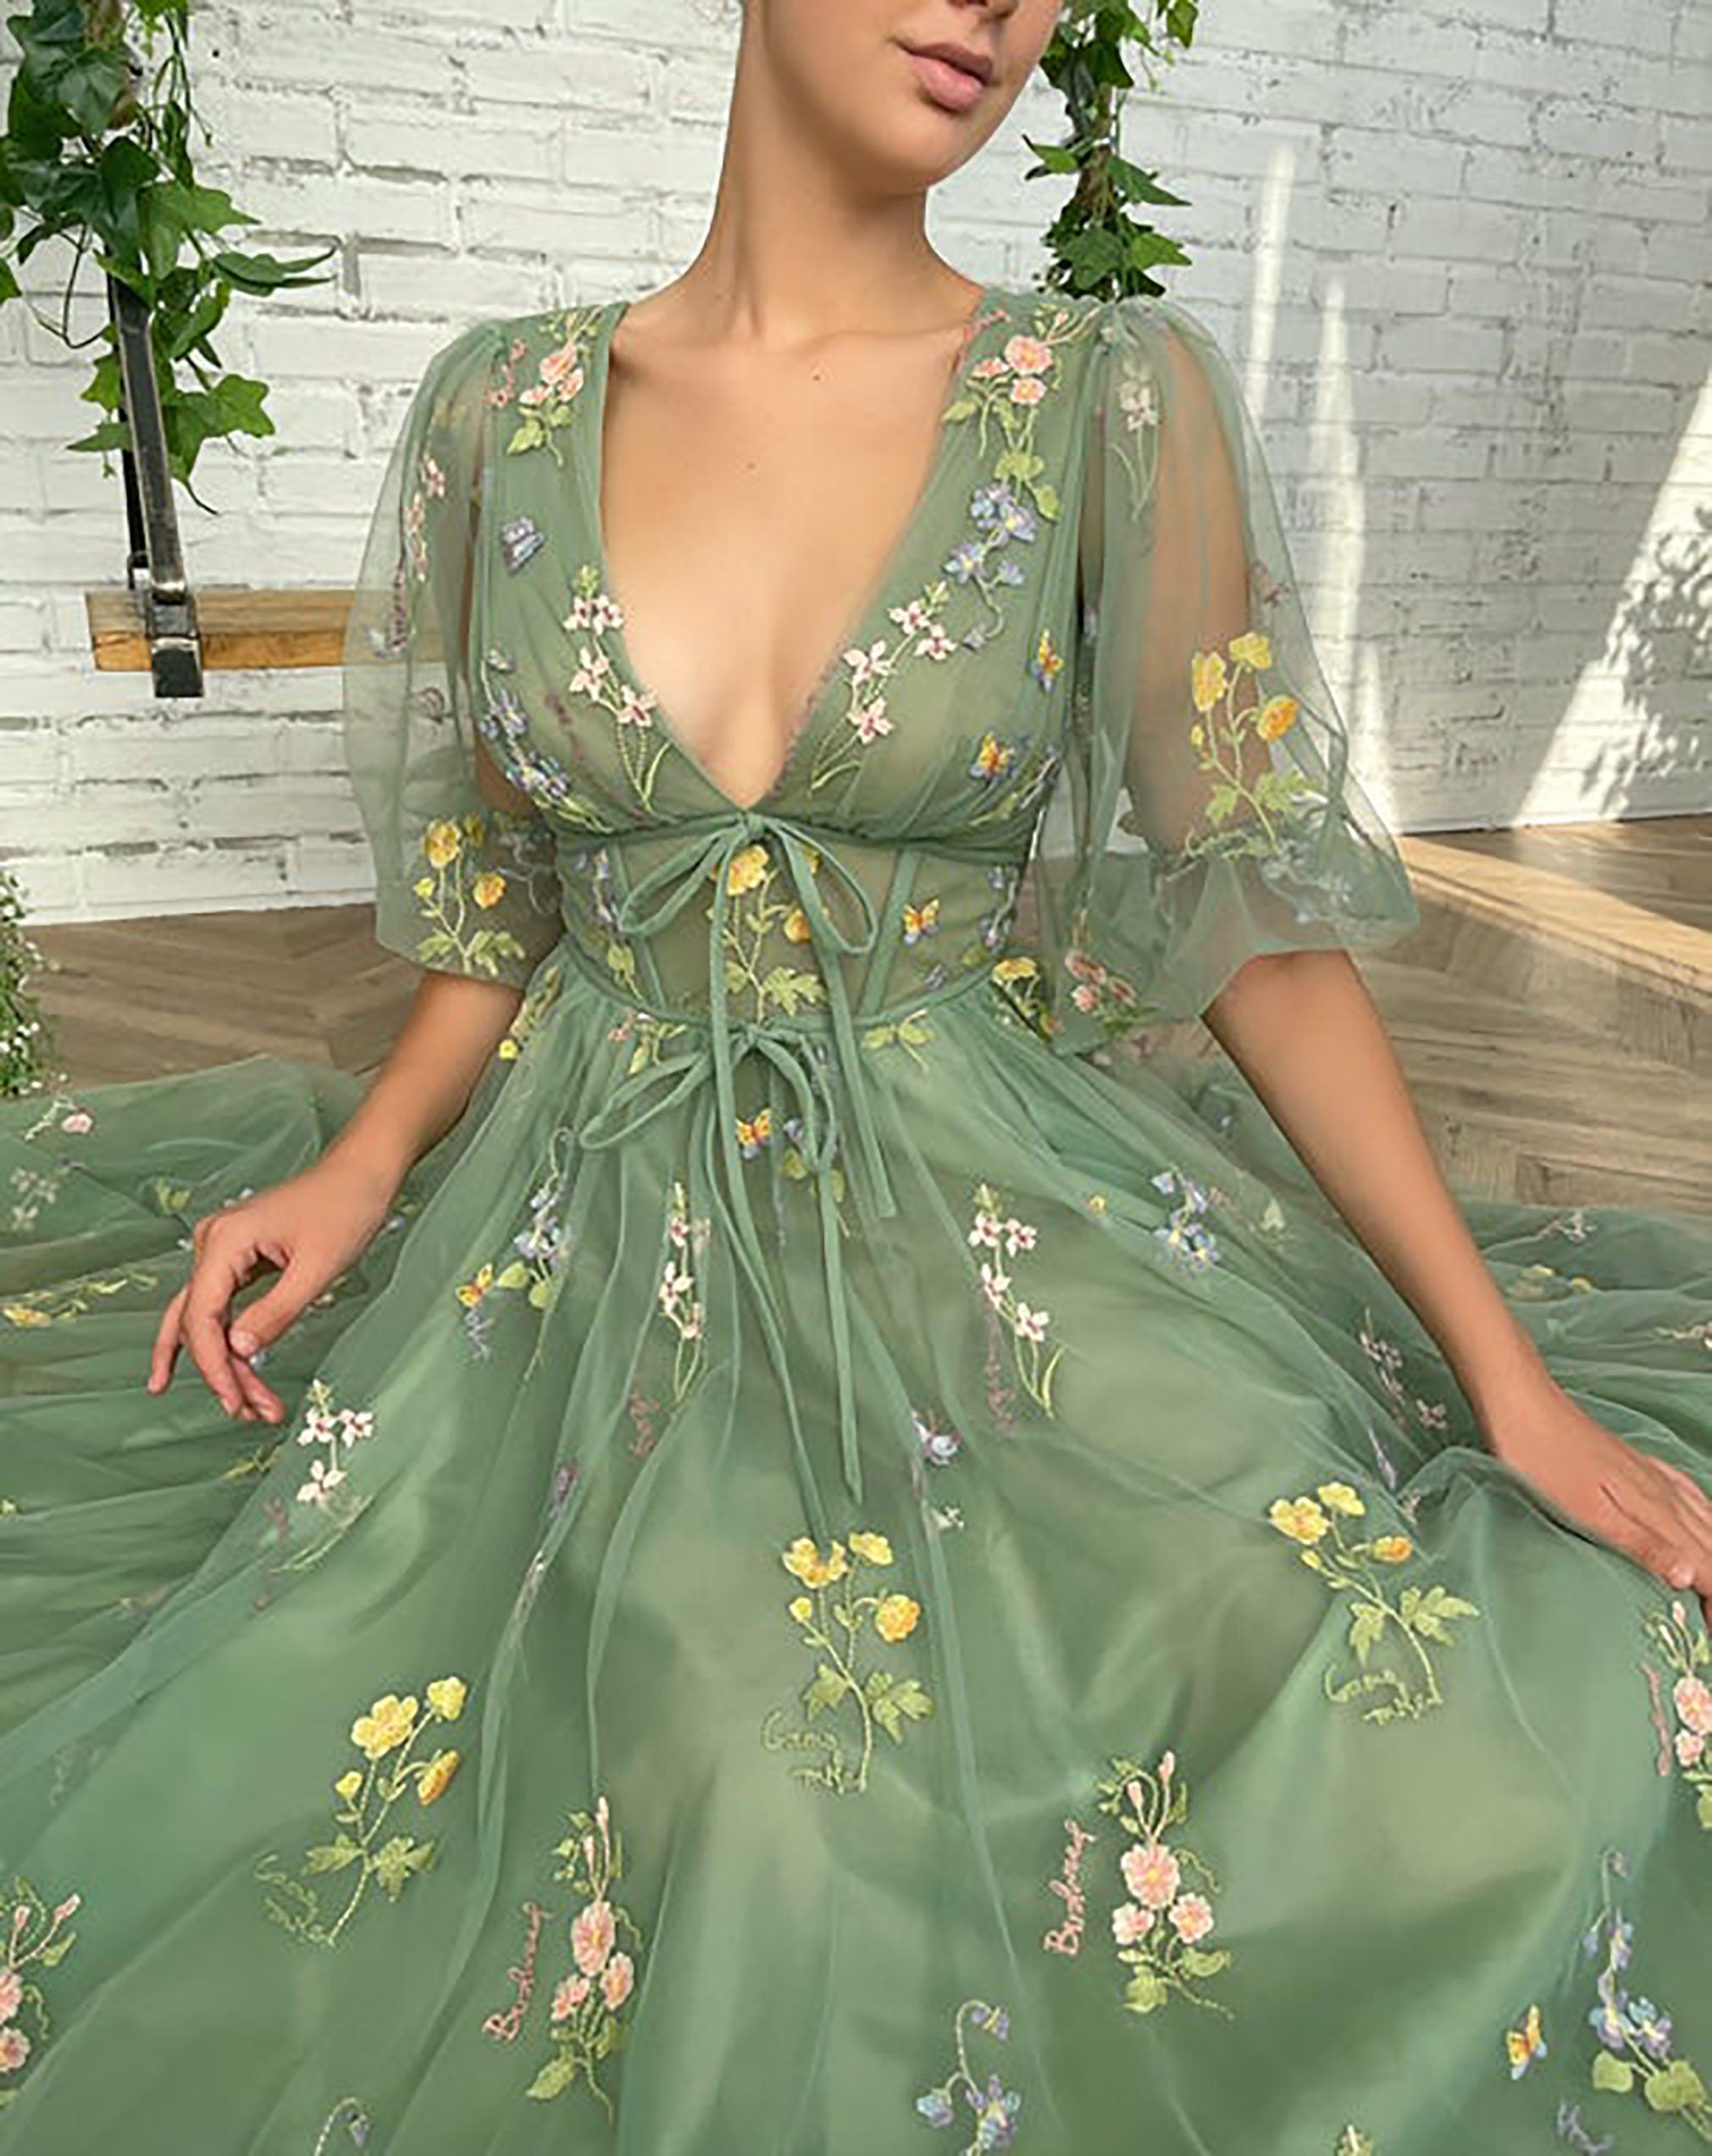 Green Puff Long Sleeve Floral Embroidery Evening Dress Cocktail Outfit